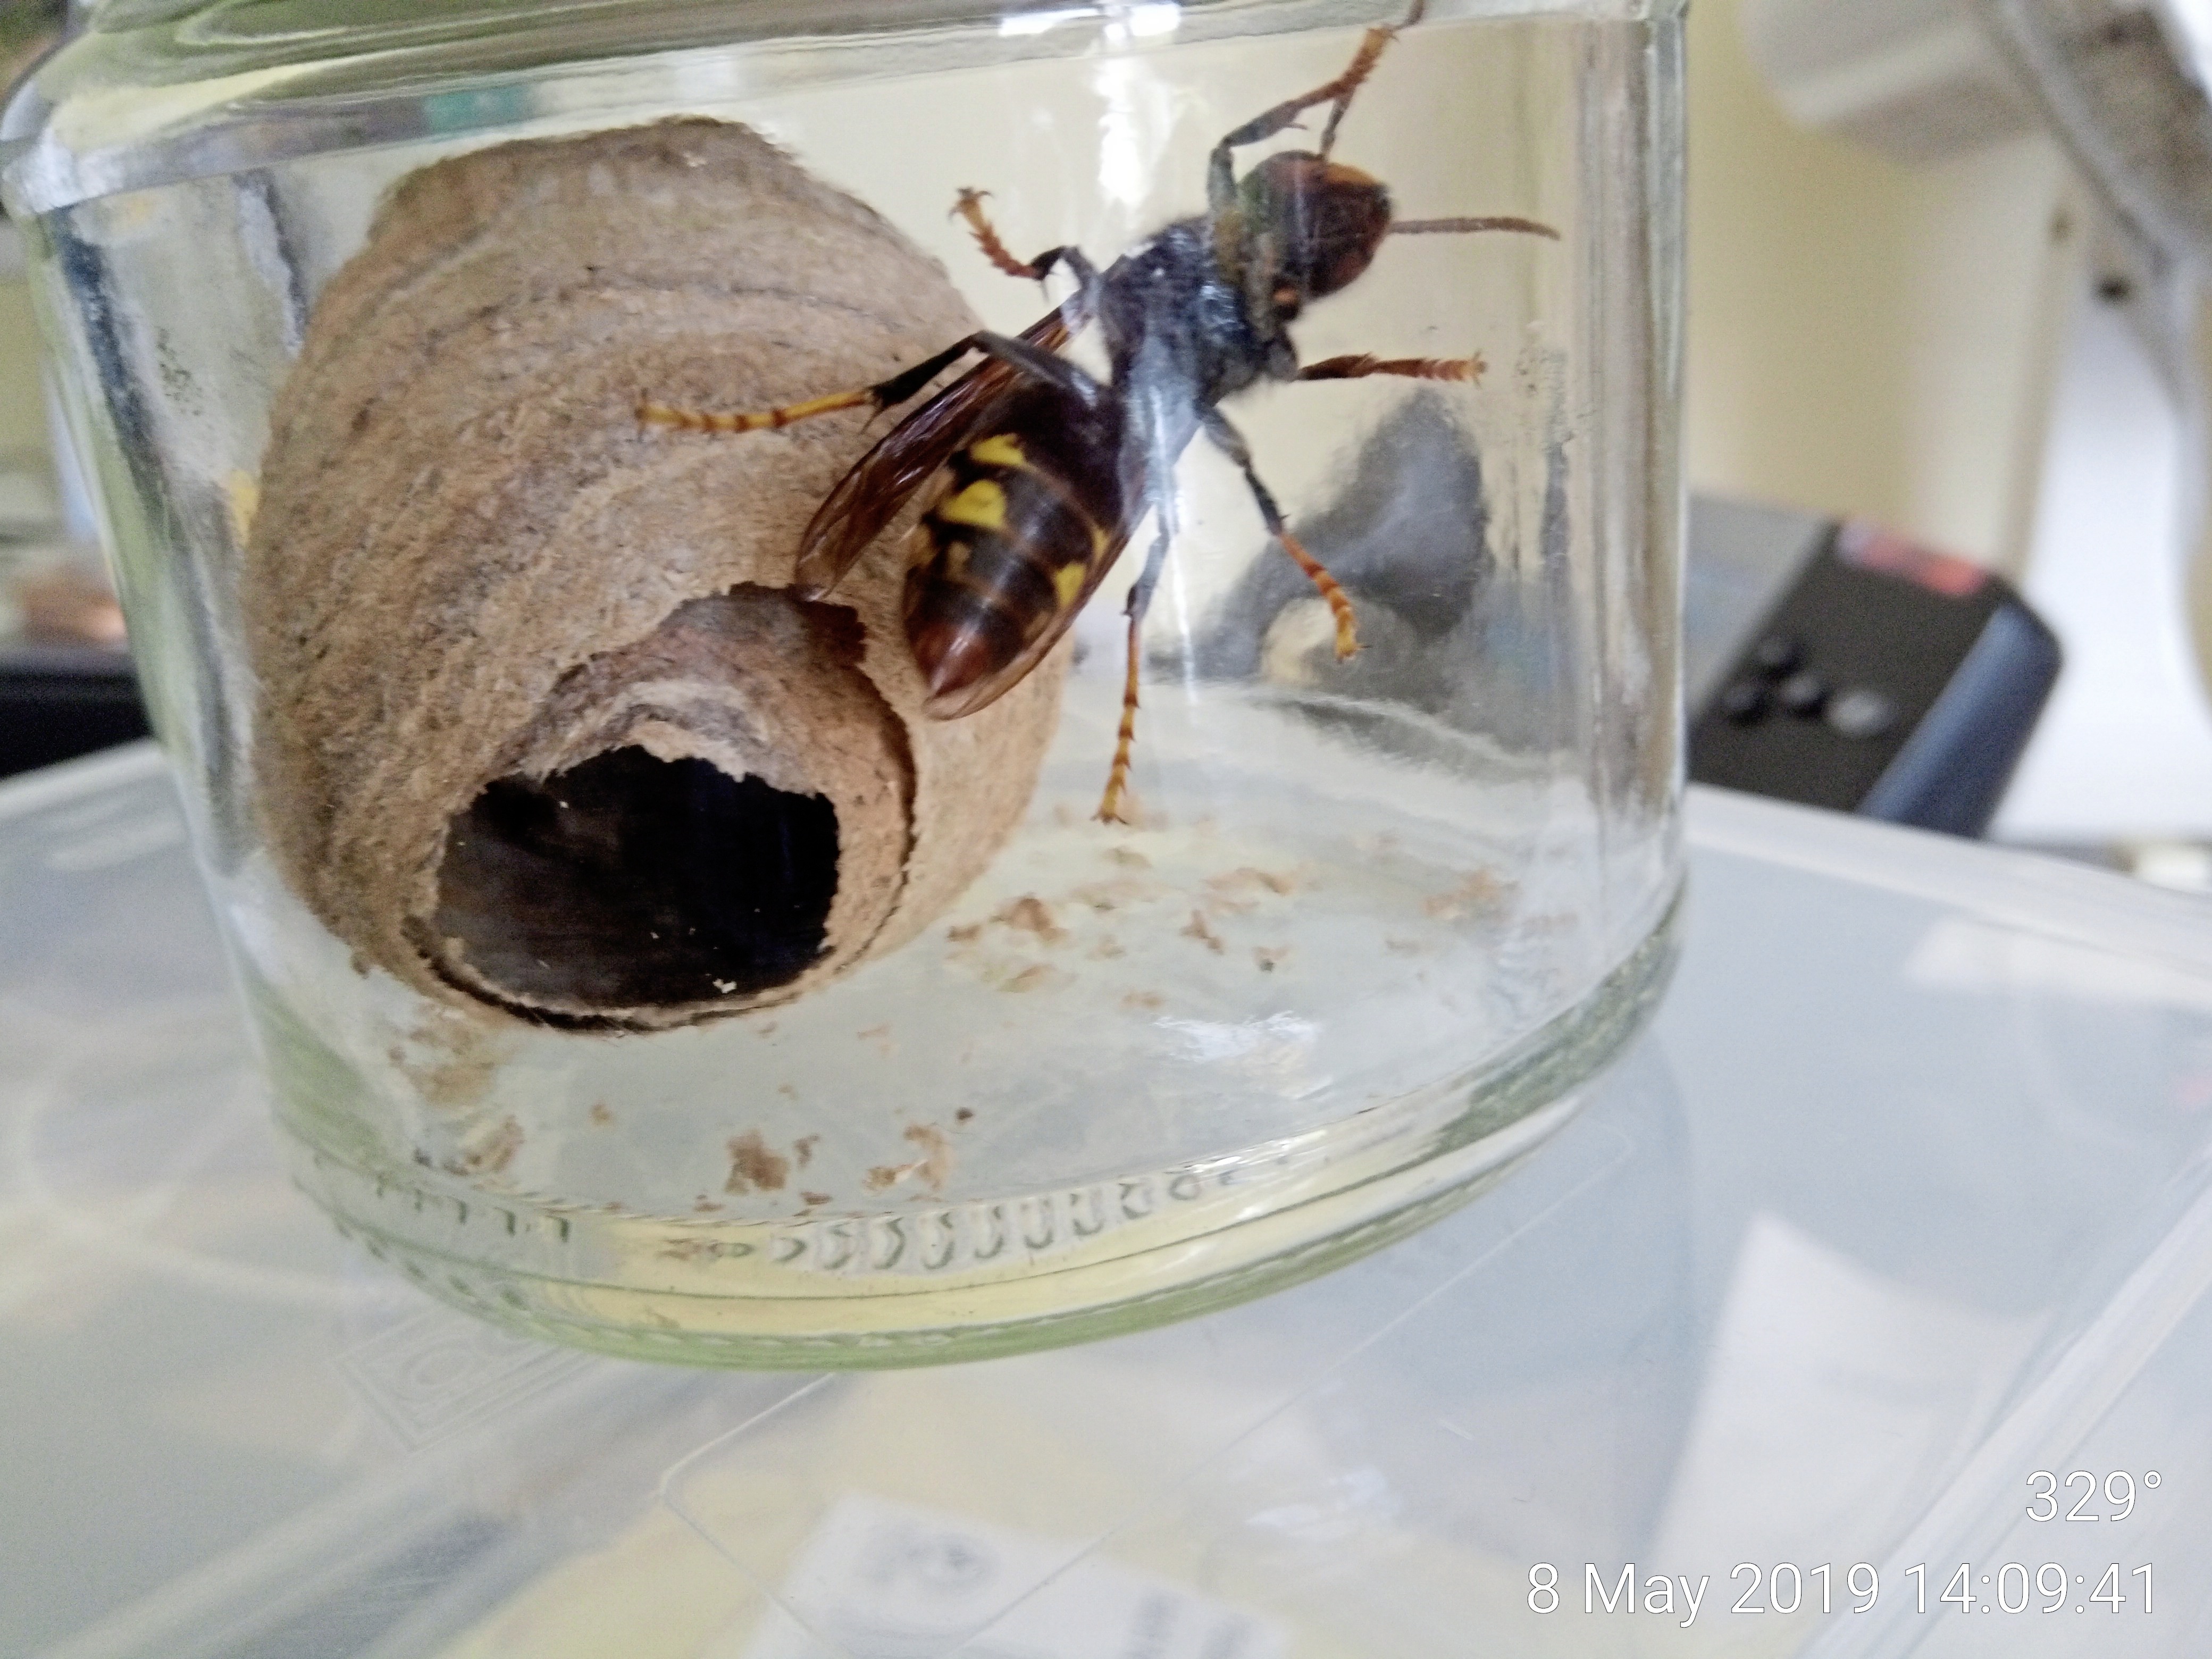 A recently caught Asian hornet queen with its newly constructed primary nest. Picture:Asian Hornet Strategy Project, Agriculture, Countryside and Land Management Services (26229200)